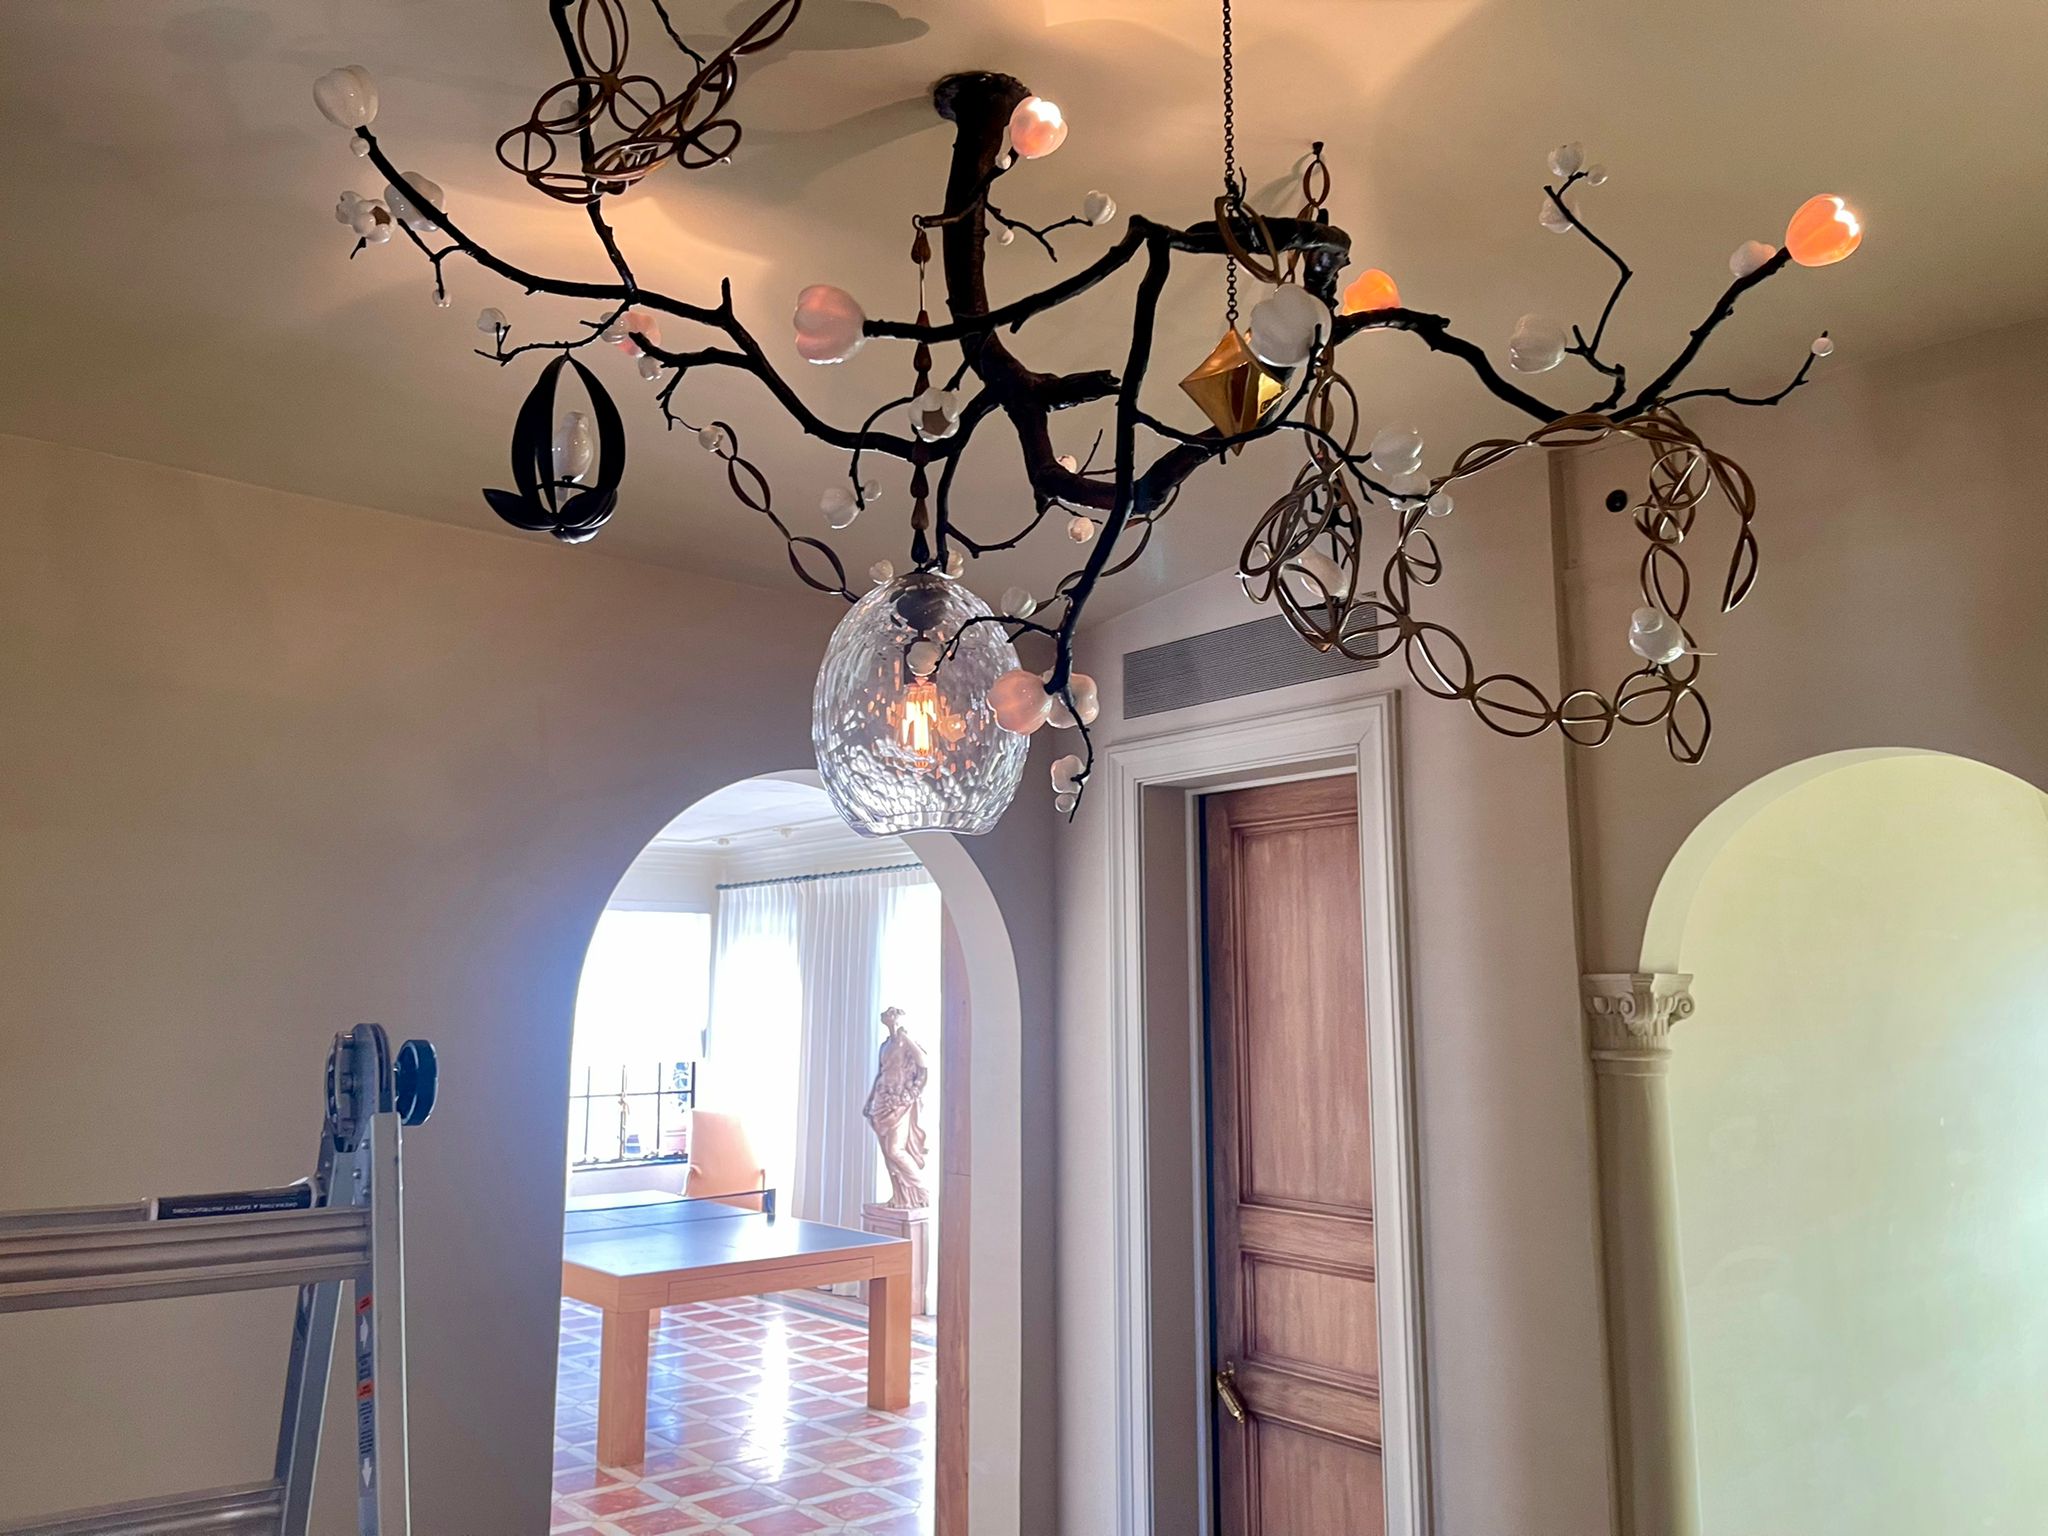 Commercial chandelier cleaning company